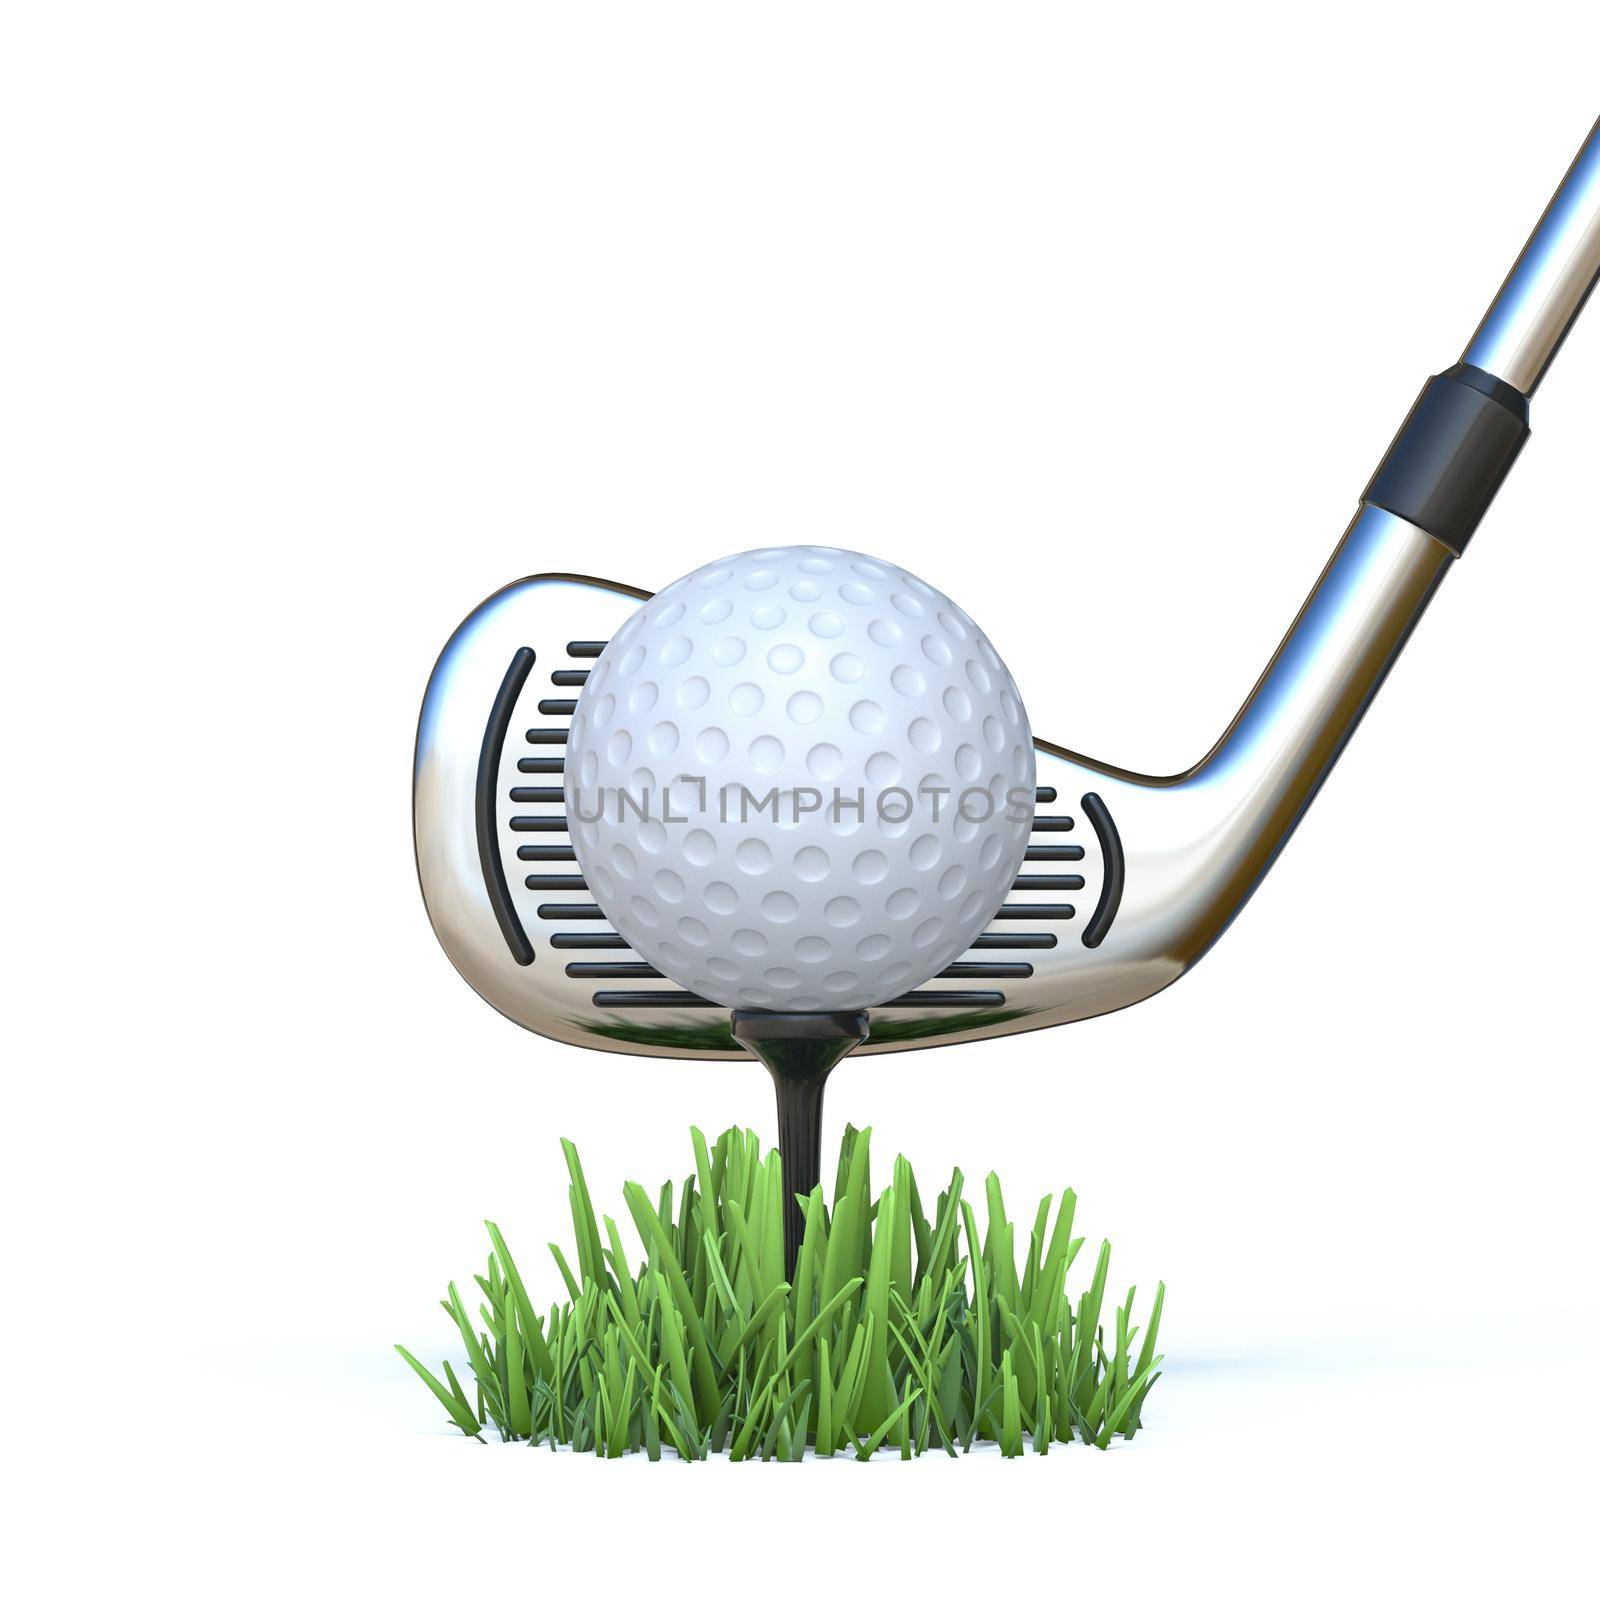 Golf ball with golf club 3D render illustration isolated on white background